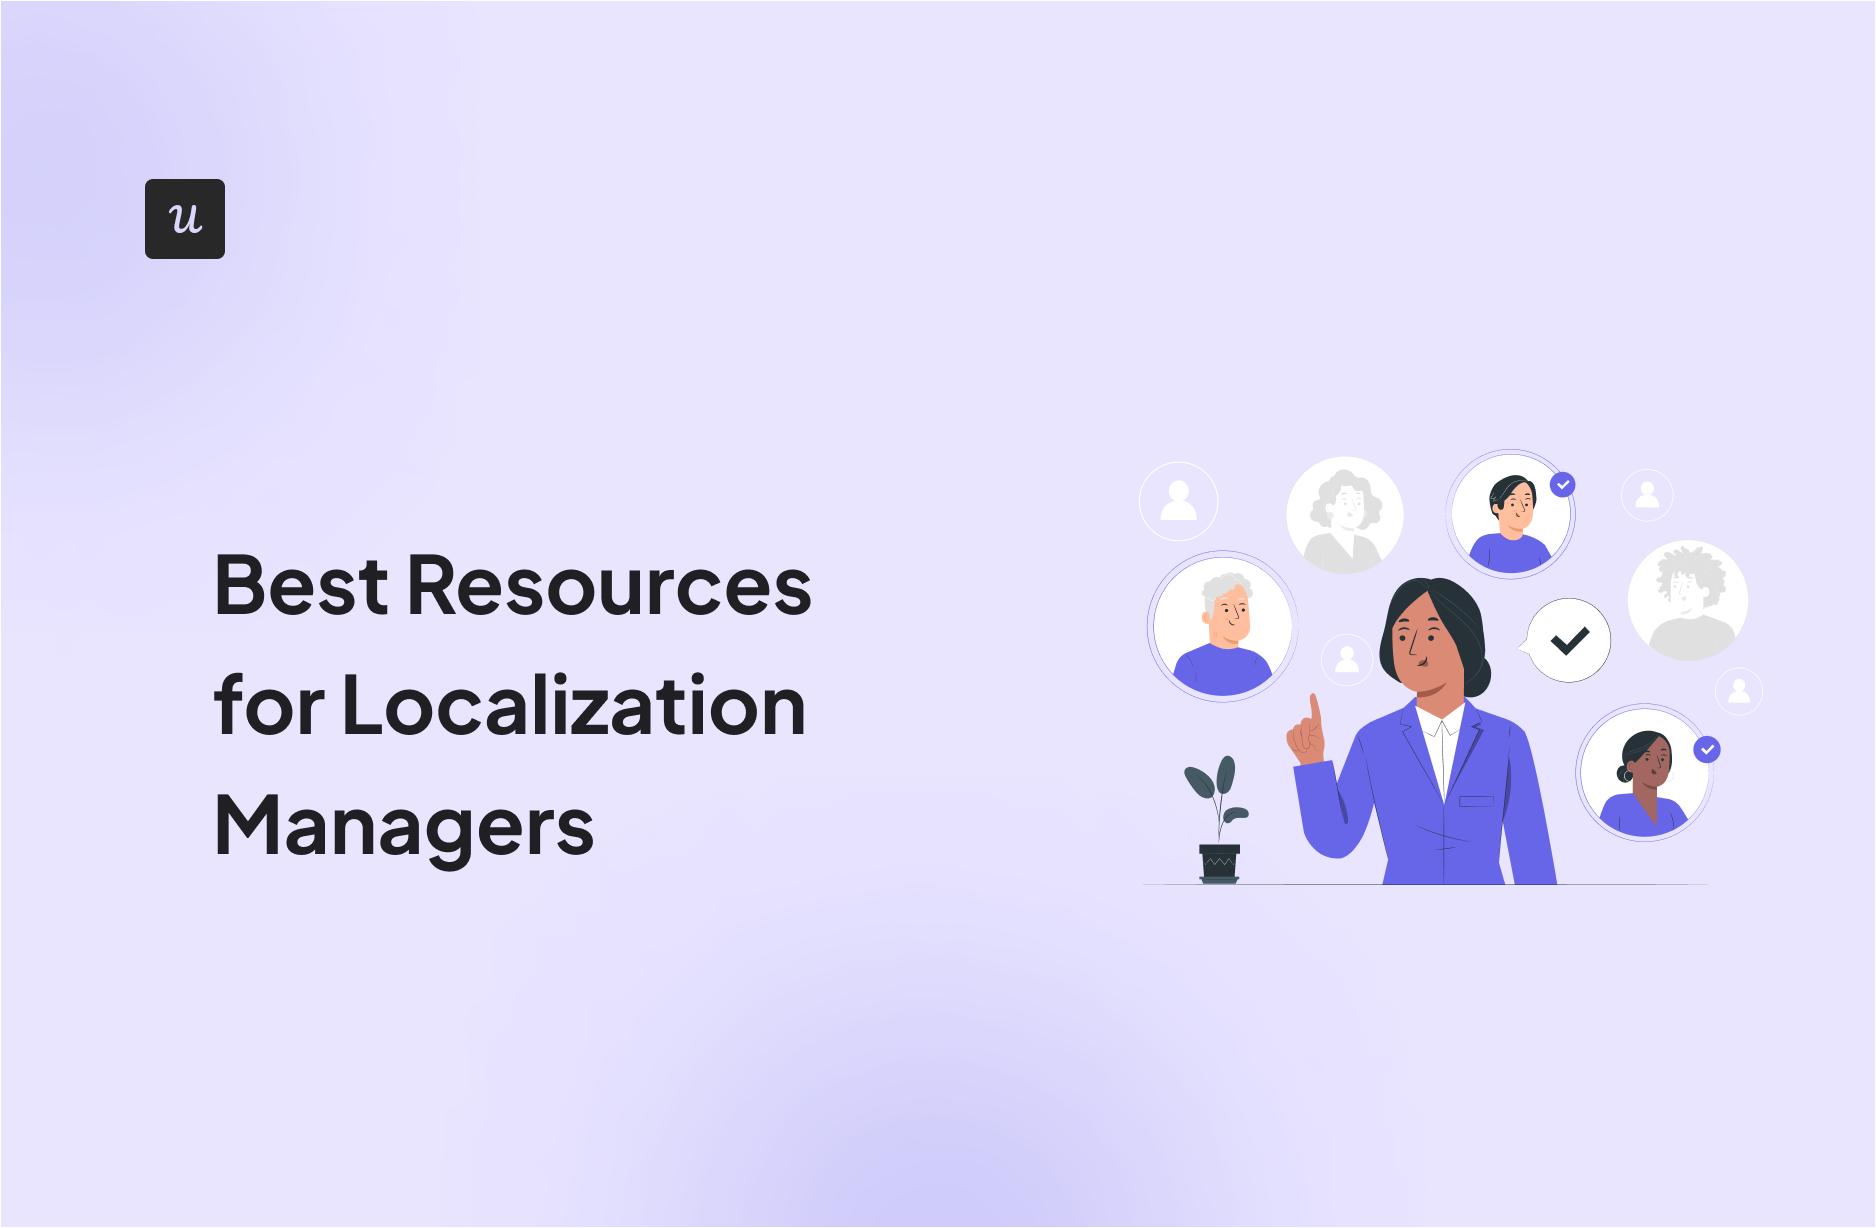 Best Resources for Localization Managers